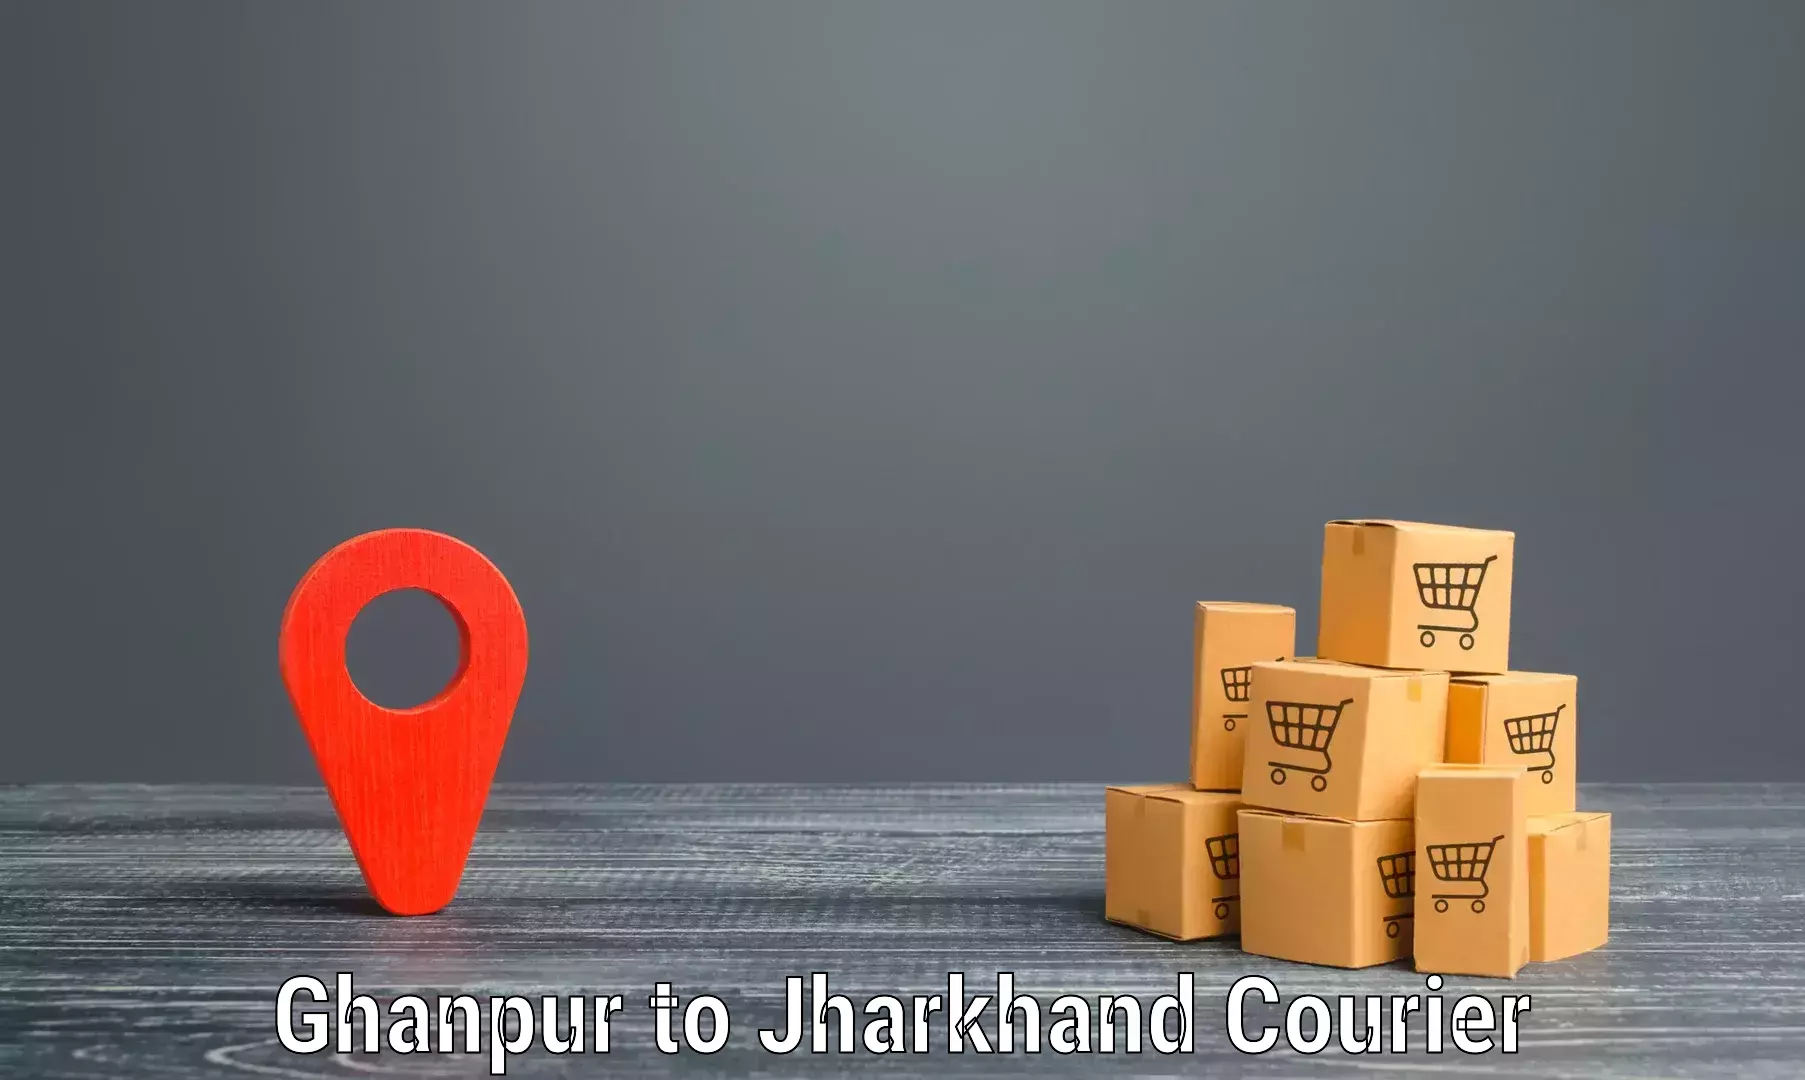 Same-day delivery solutions Ghanpur to Shikaripara